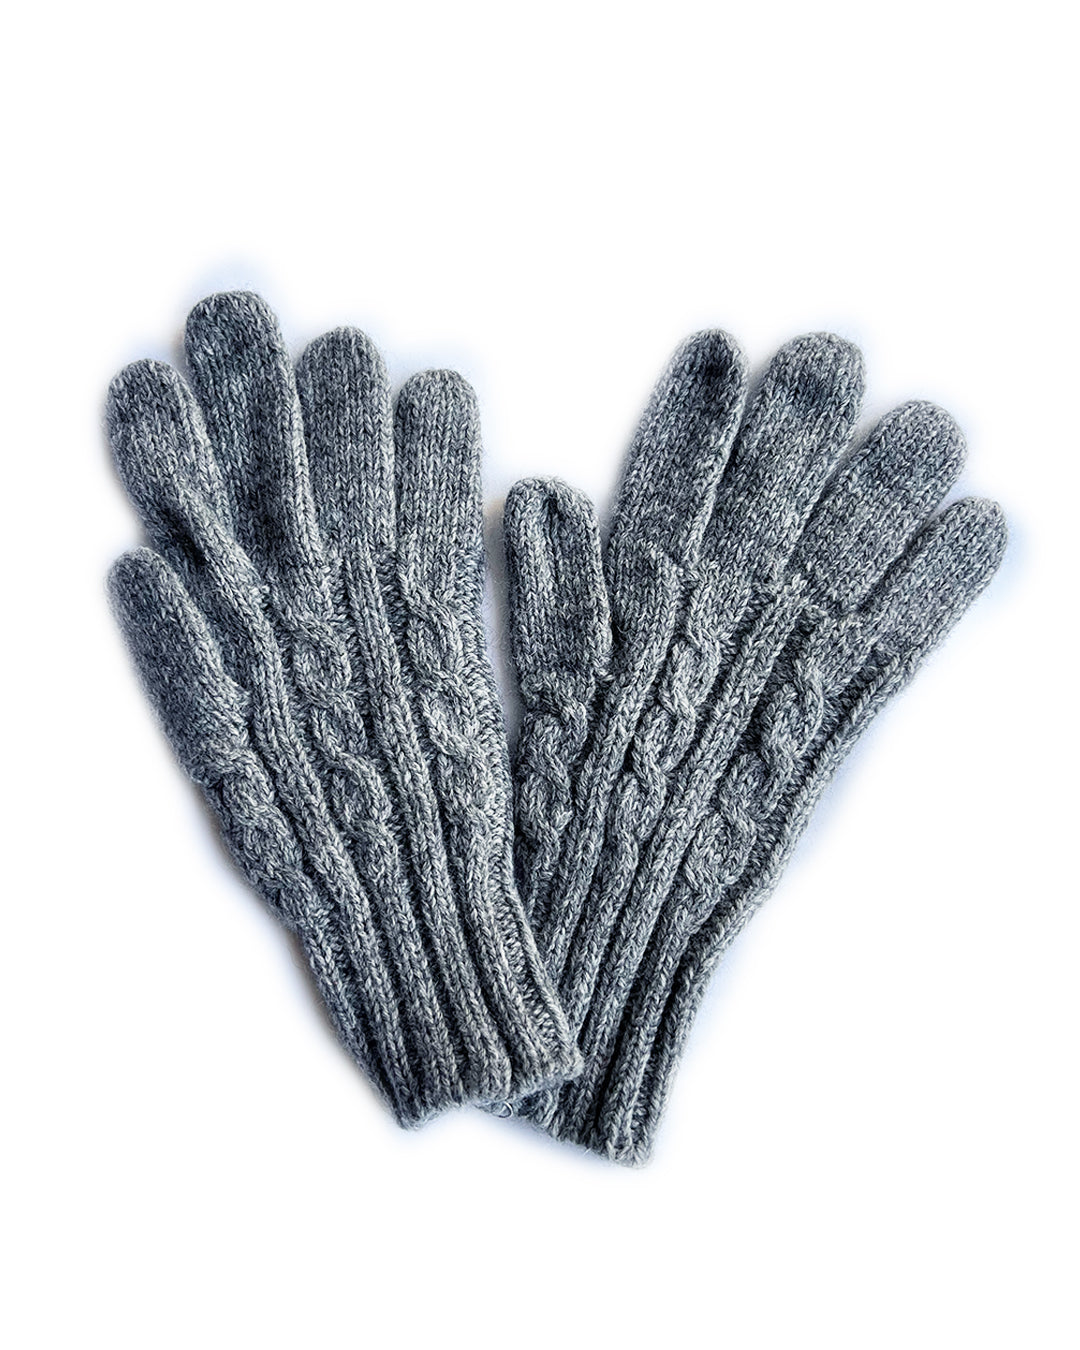 Heather Gray Cable Knit Cashmere Gloves | cukimber designsk no